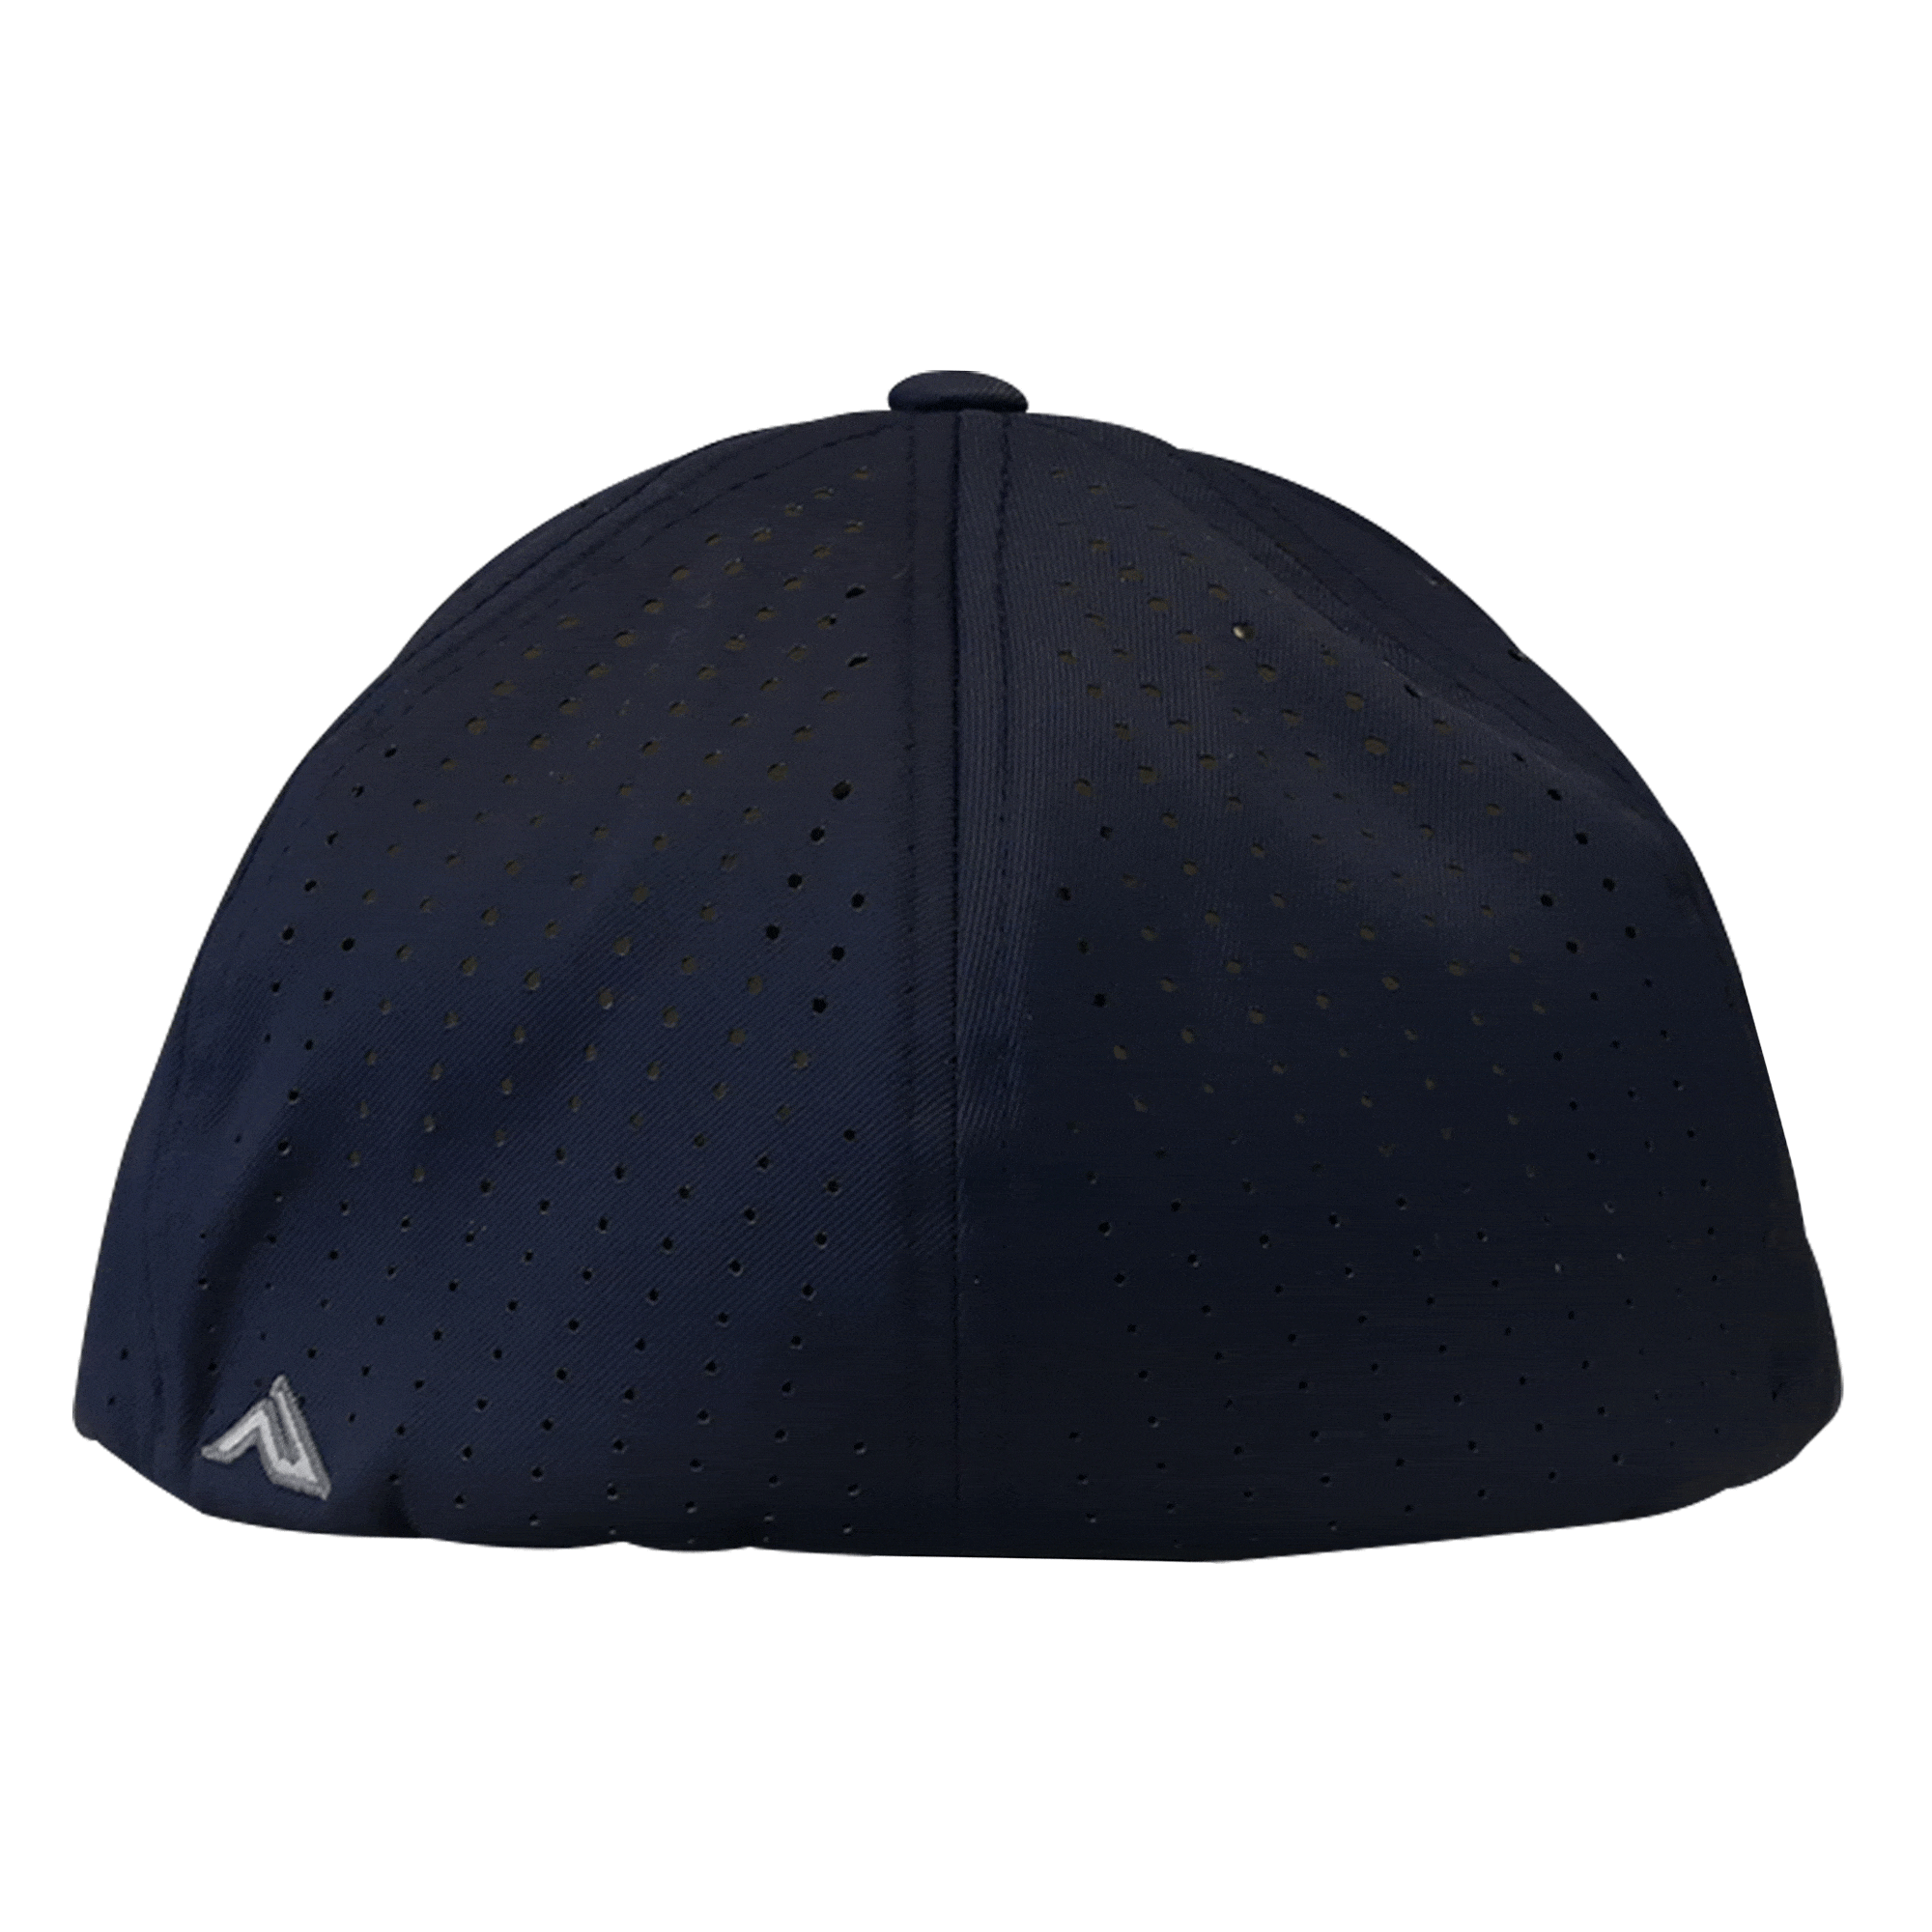 USA Rugby Perforated Rugby Cap Shop - World Flexfit Performance